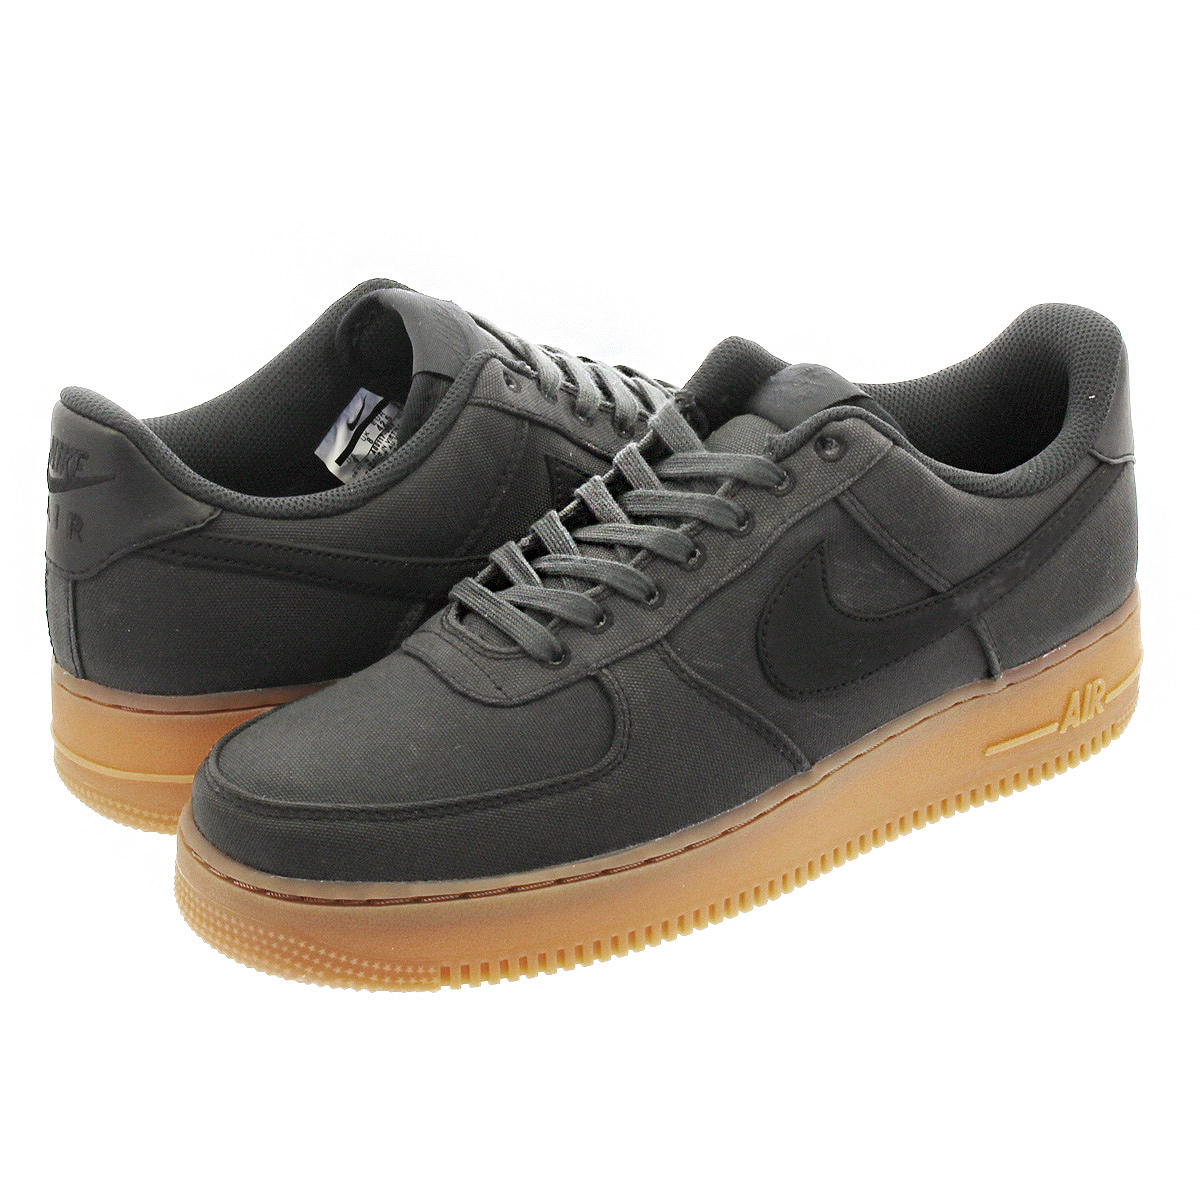 nike air force 1 suede lv8